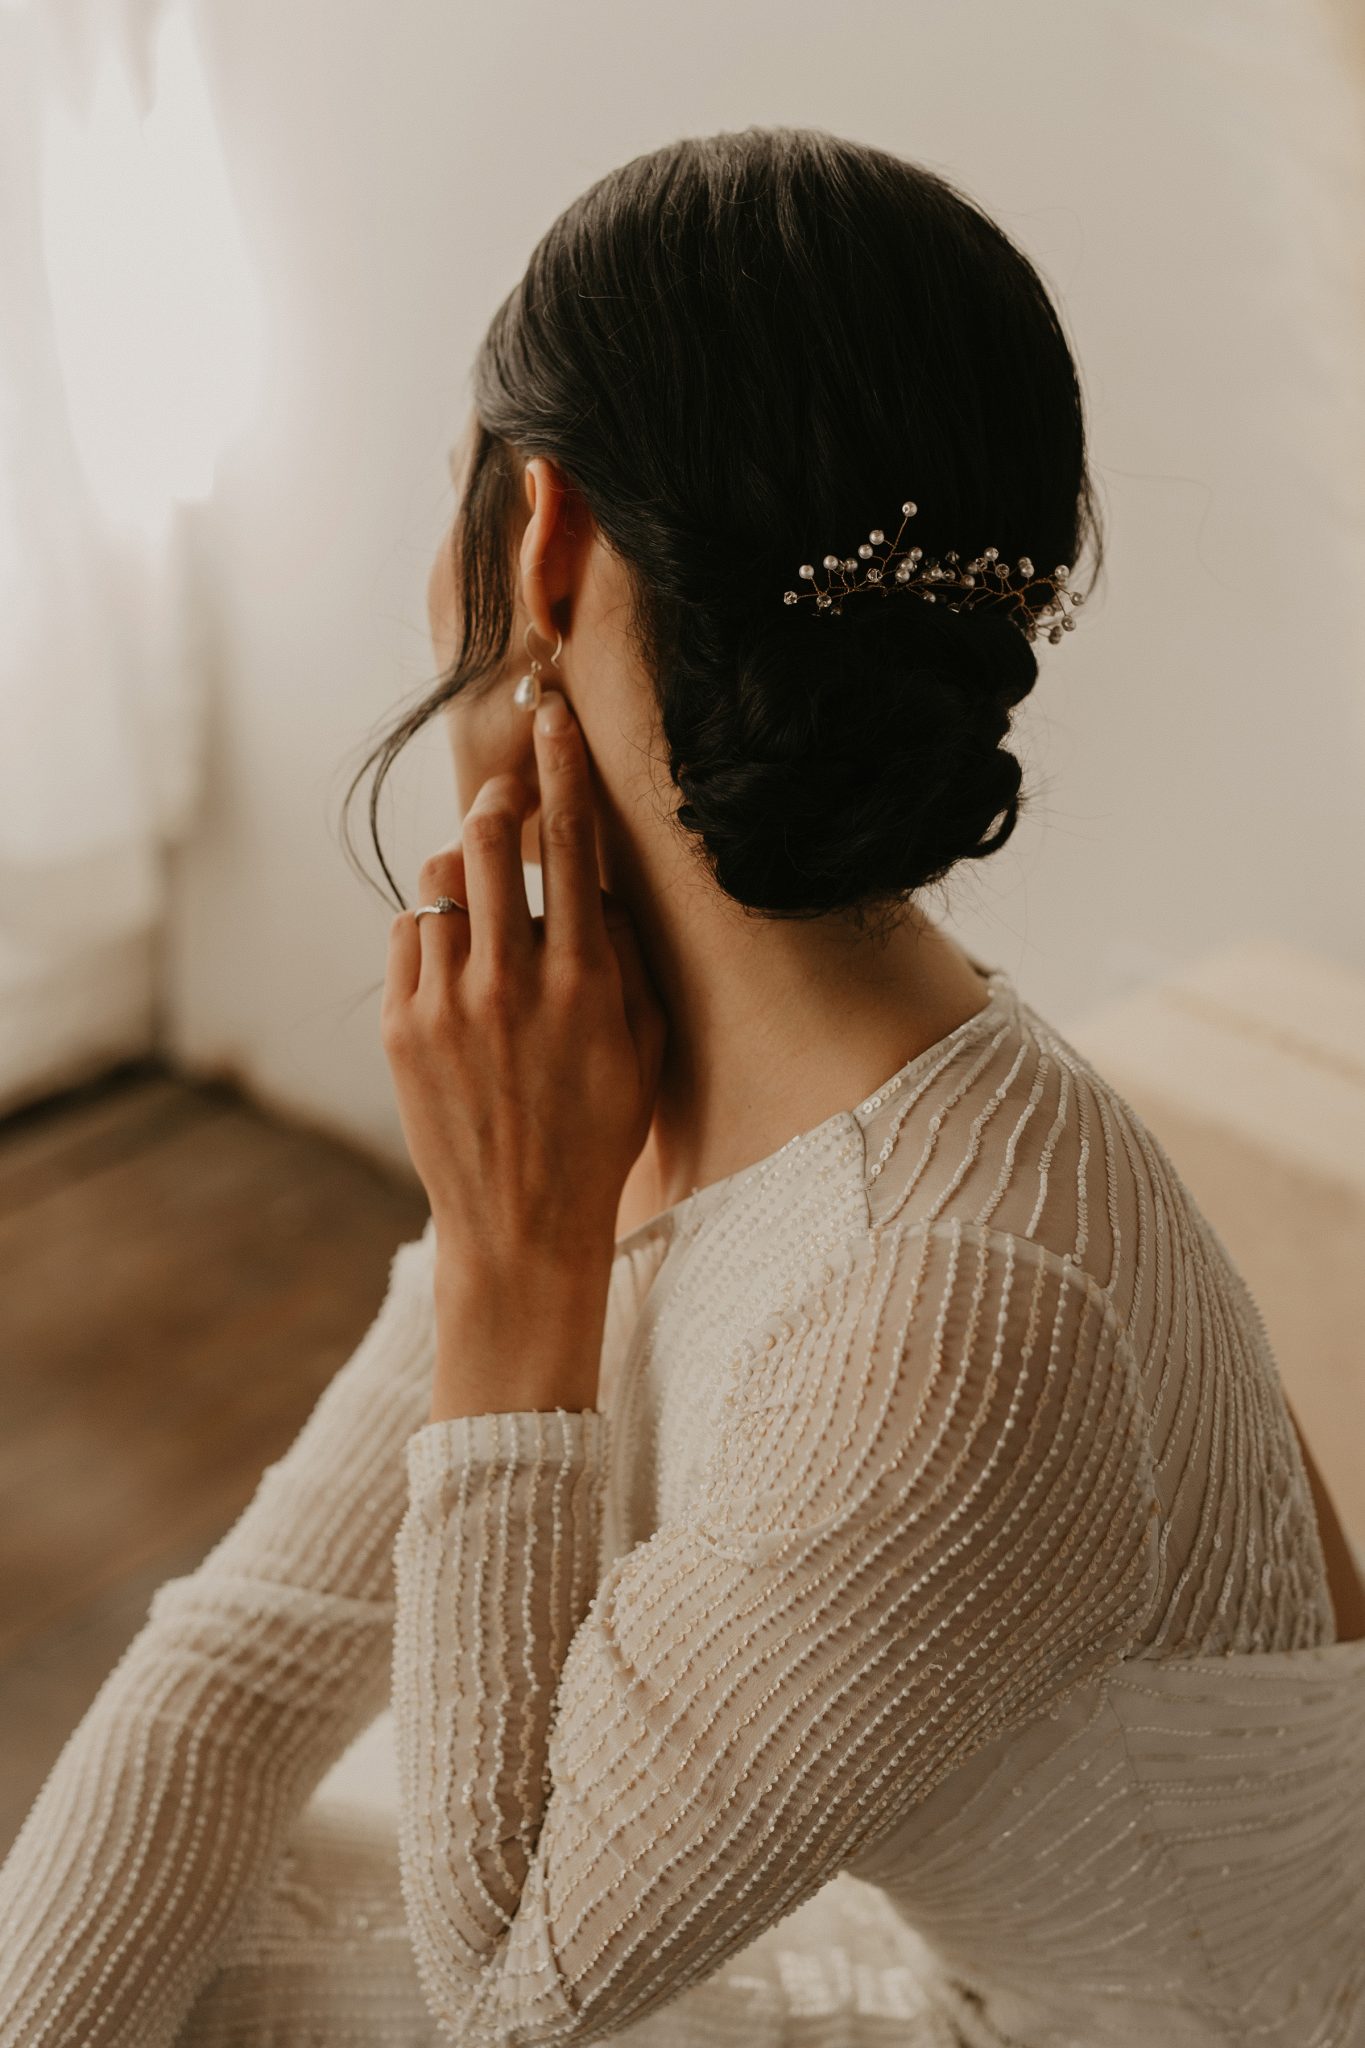 Bridal Minimalism Feature on Bronte Bride: Delica Bridal Shares All About New Bridal Trends & Dress Shopping During Covid, hair jewelry, hair accessories, bridal hair